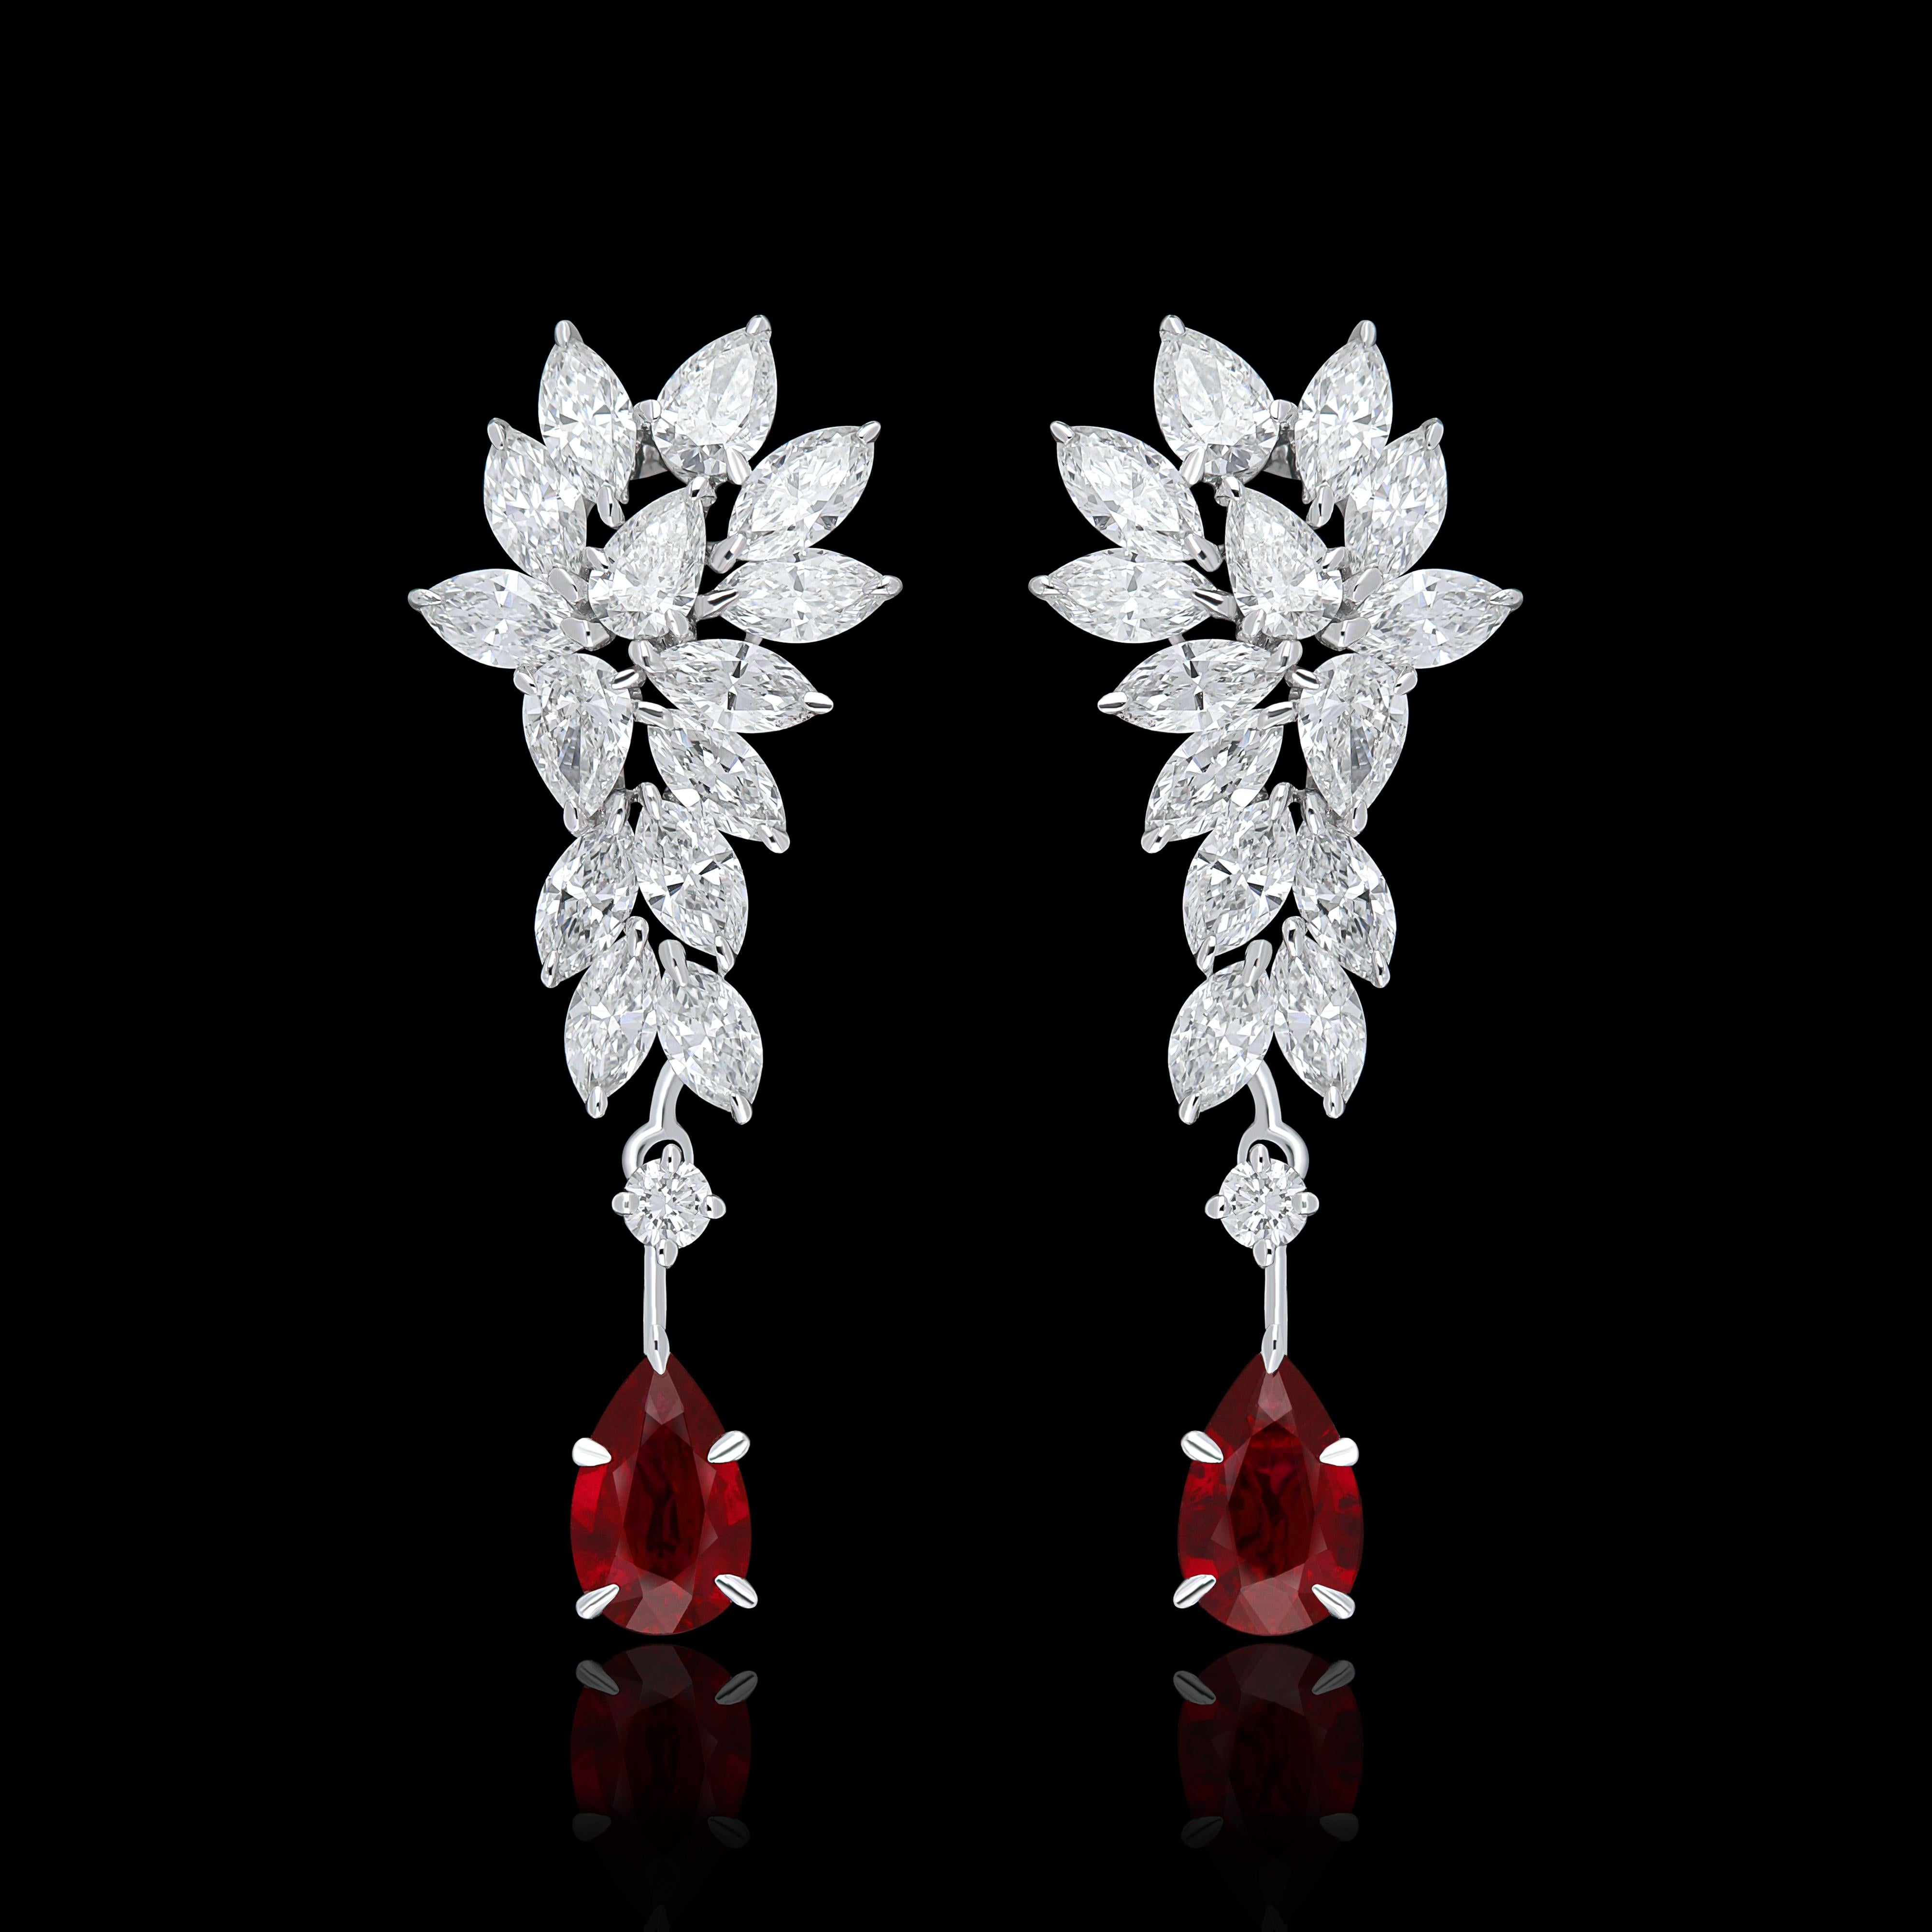 Elegant and exquisitely detailed 18 Karat White Gold Earring, center set with 0.69Cts .Pear Shape Ruby Mozambique and micro pave set Diamonds, weighing approx. 1.76Cts Beautifully Hand crafted in 18 Karat White Gold.

Stone Detail:
Ruby Mozambique: